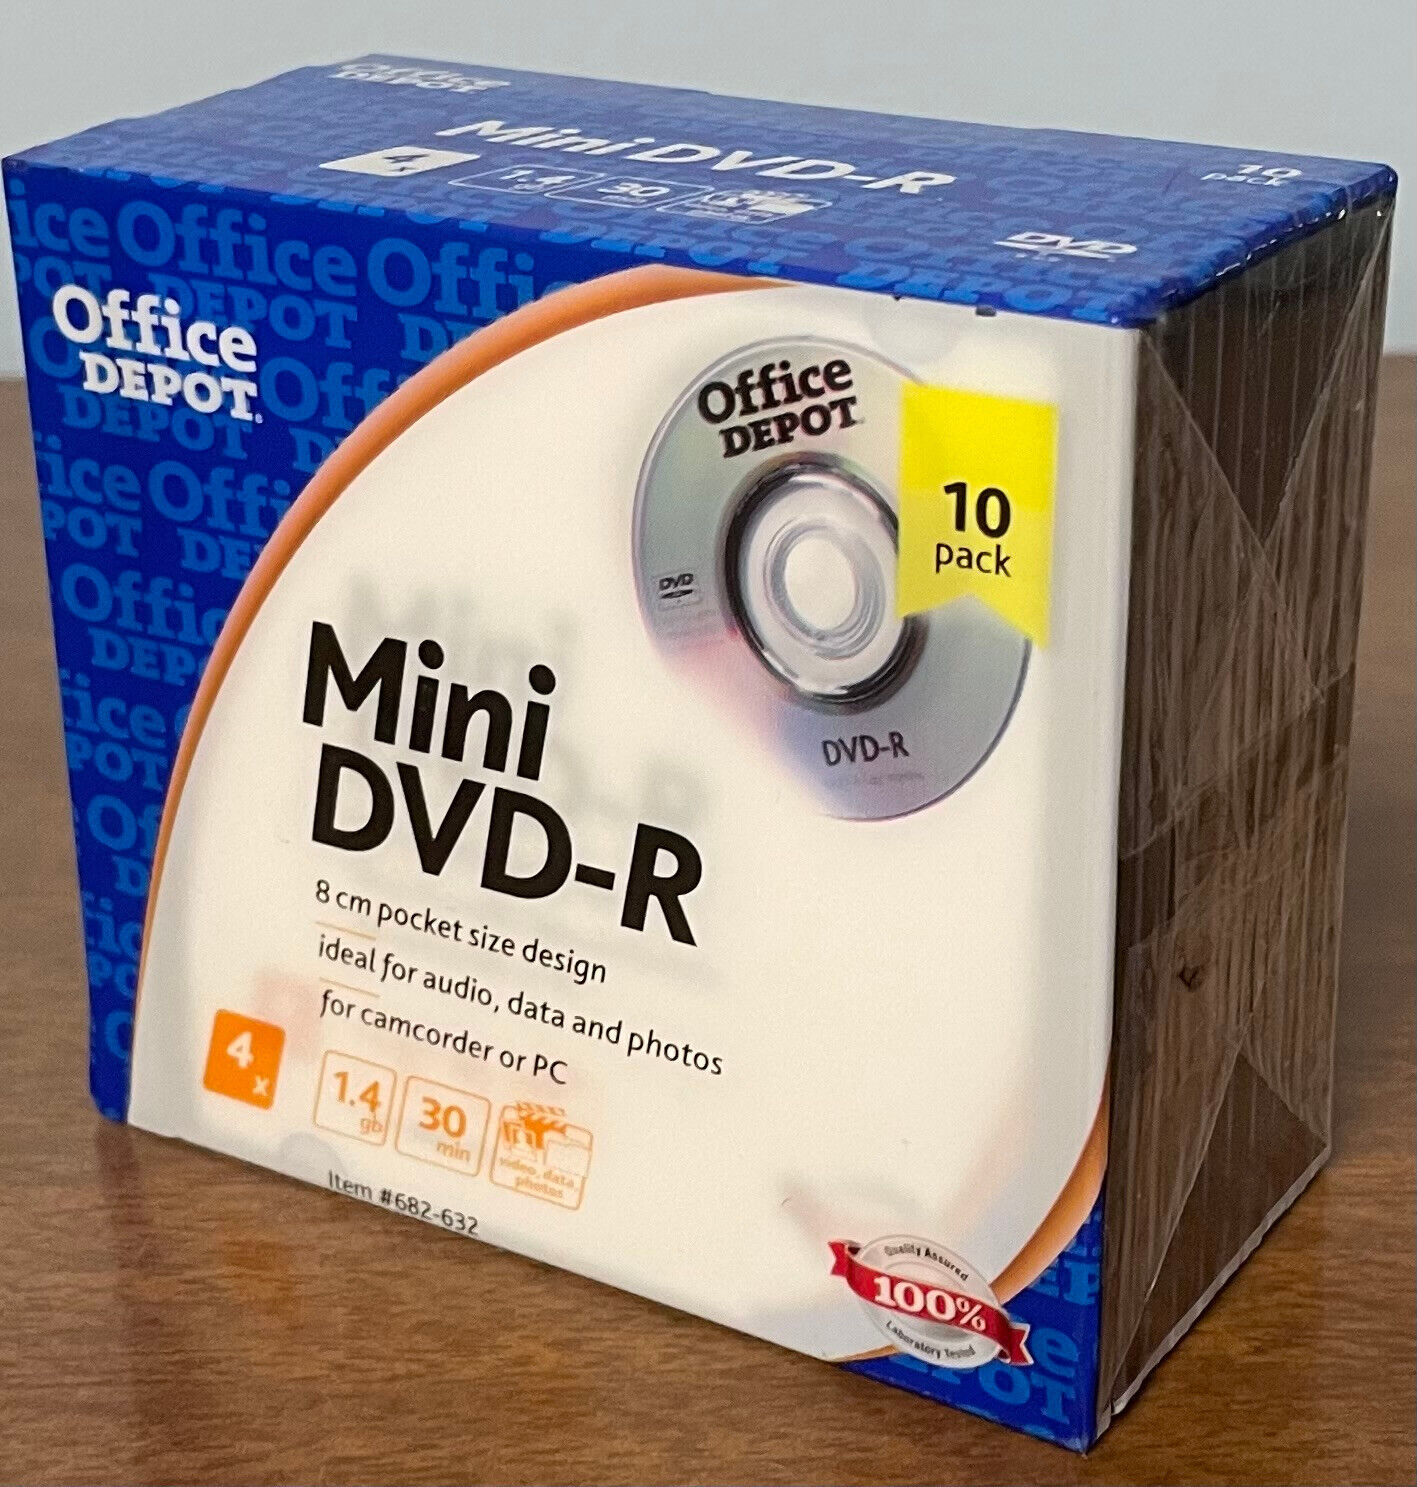 10 Pack of Office Depot Mini DVD-R Discs with Cases - New Sealed - Gamecube Size